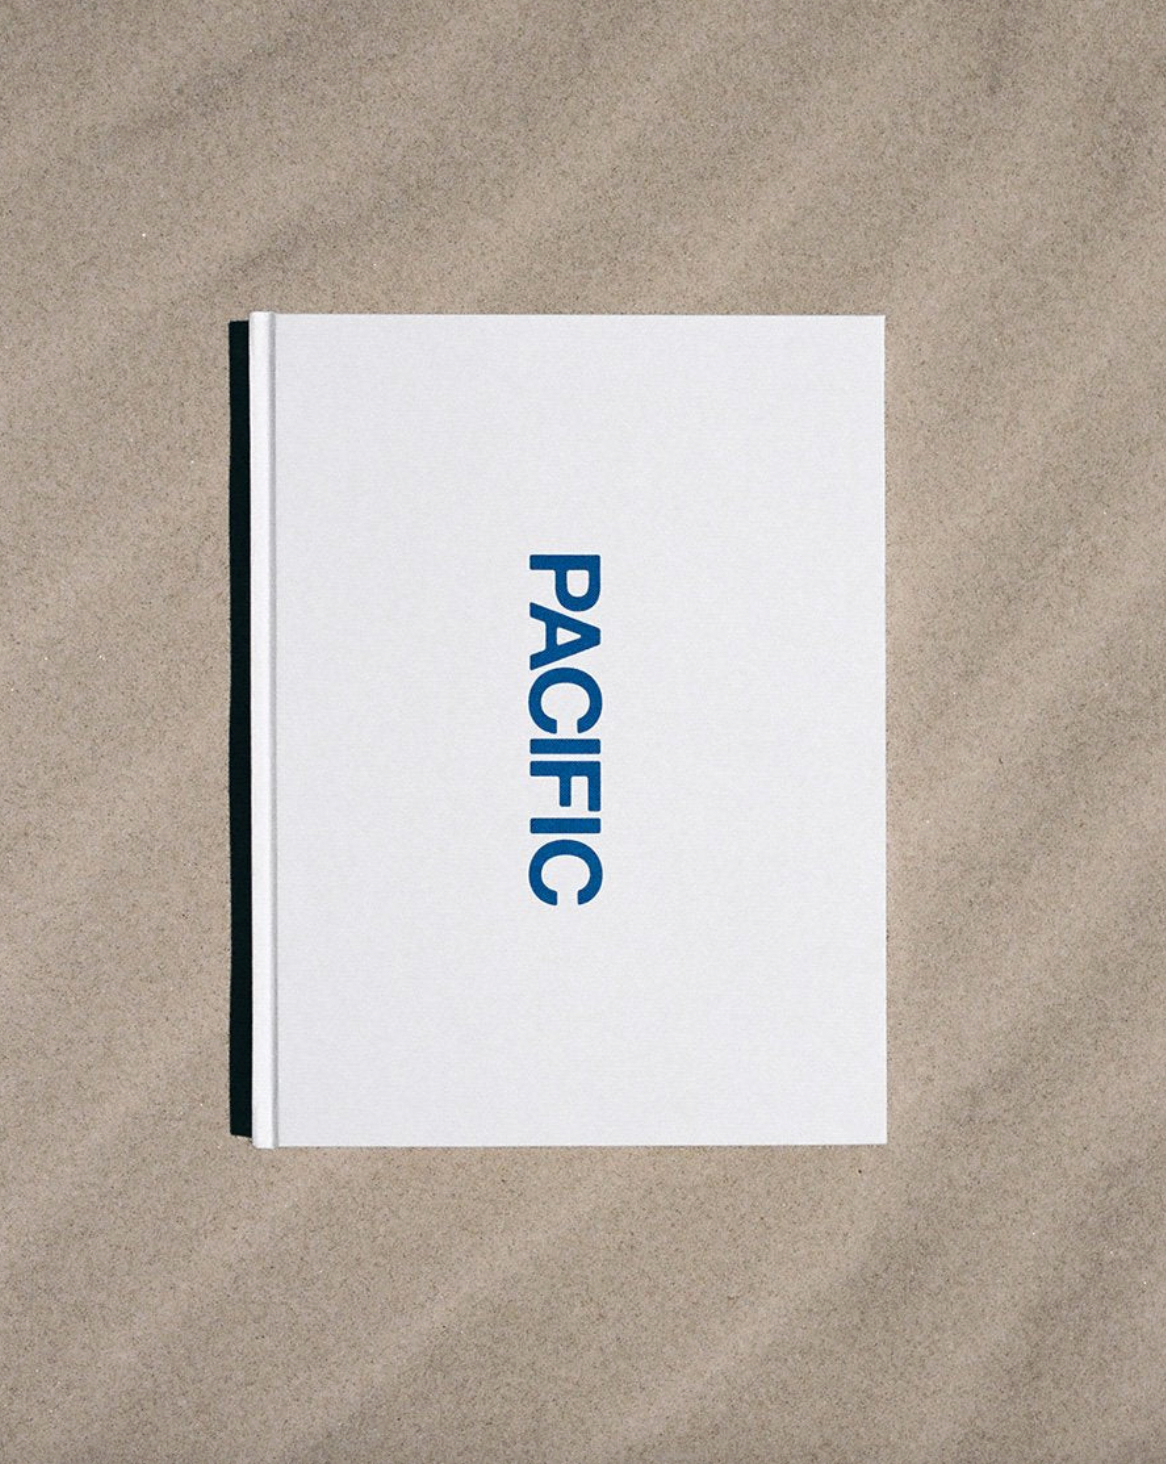 PACIFIC COFFEE TABLE BOOK MING NOMCHOMG